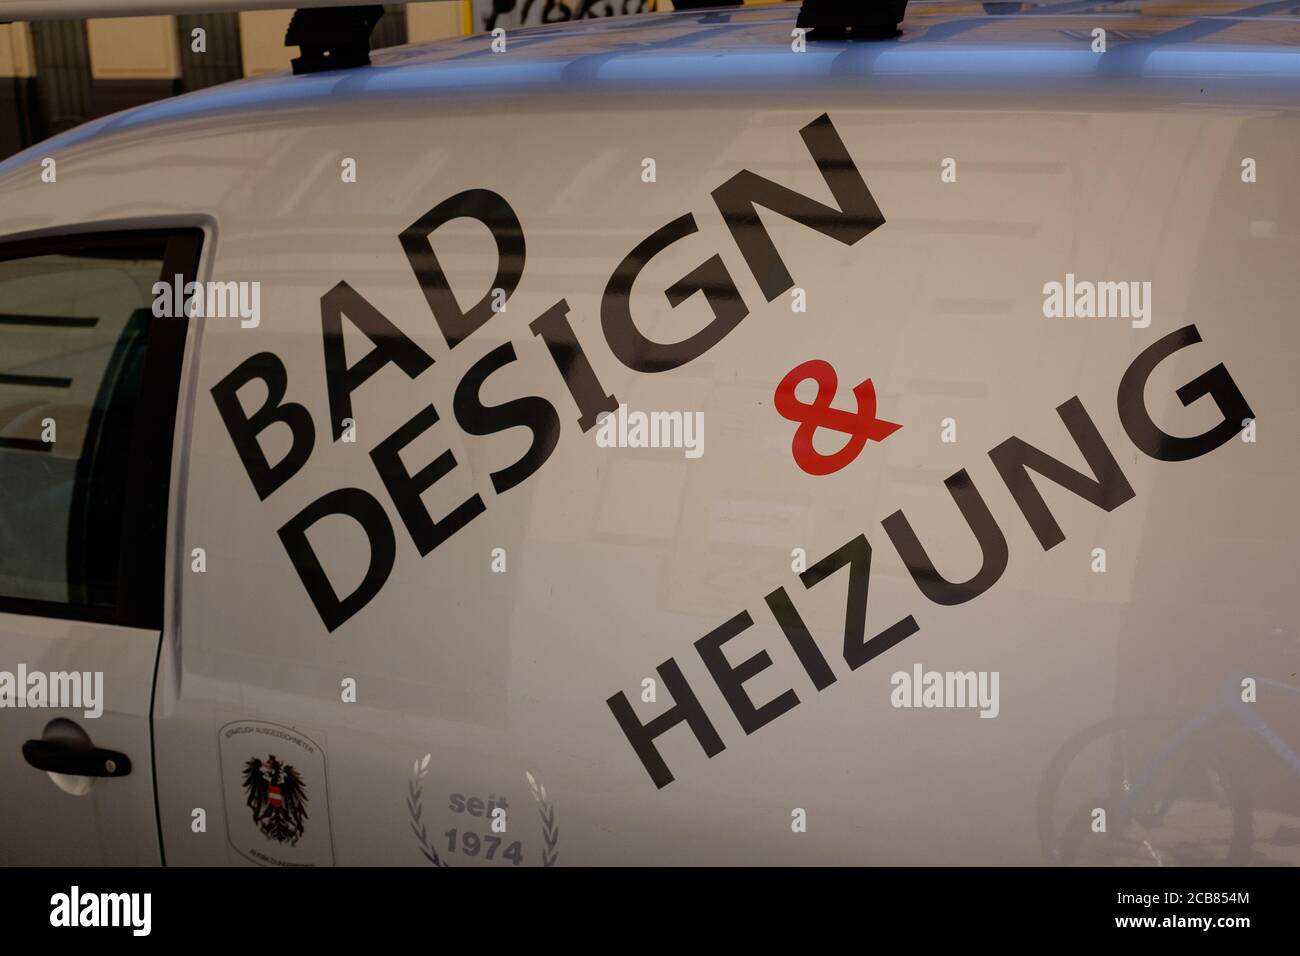 A white van with the caption 'Bad design and Heizung' business name written on the side Stock Photo